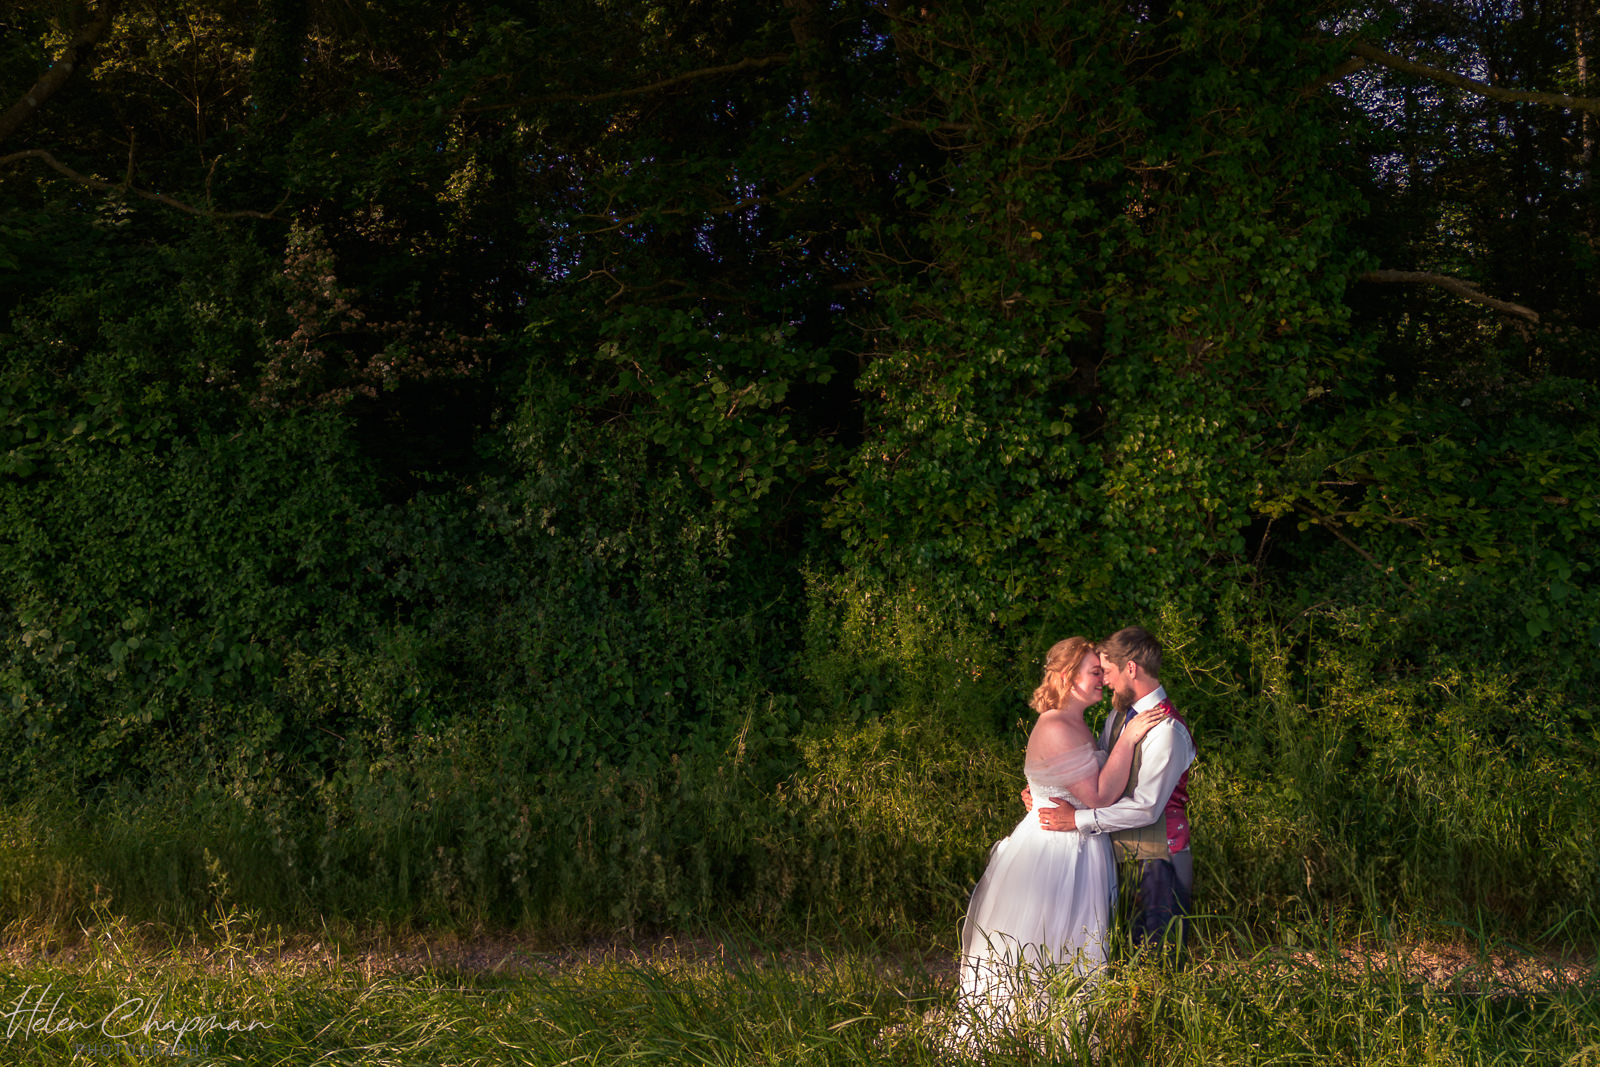 Couple embracing in sunset-lit forest clearing.